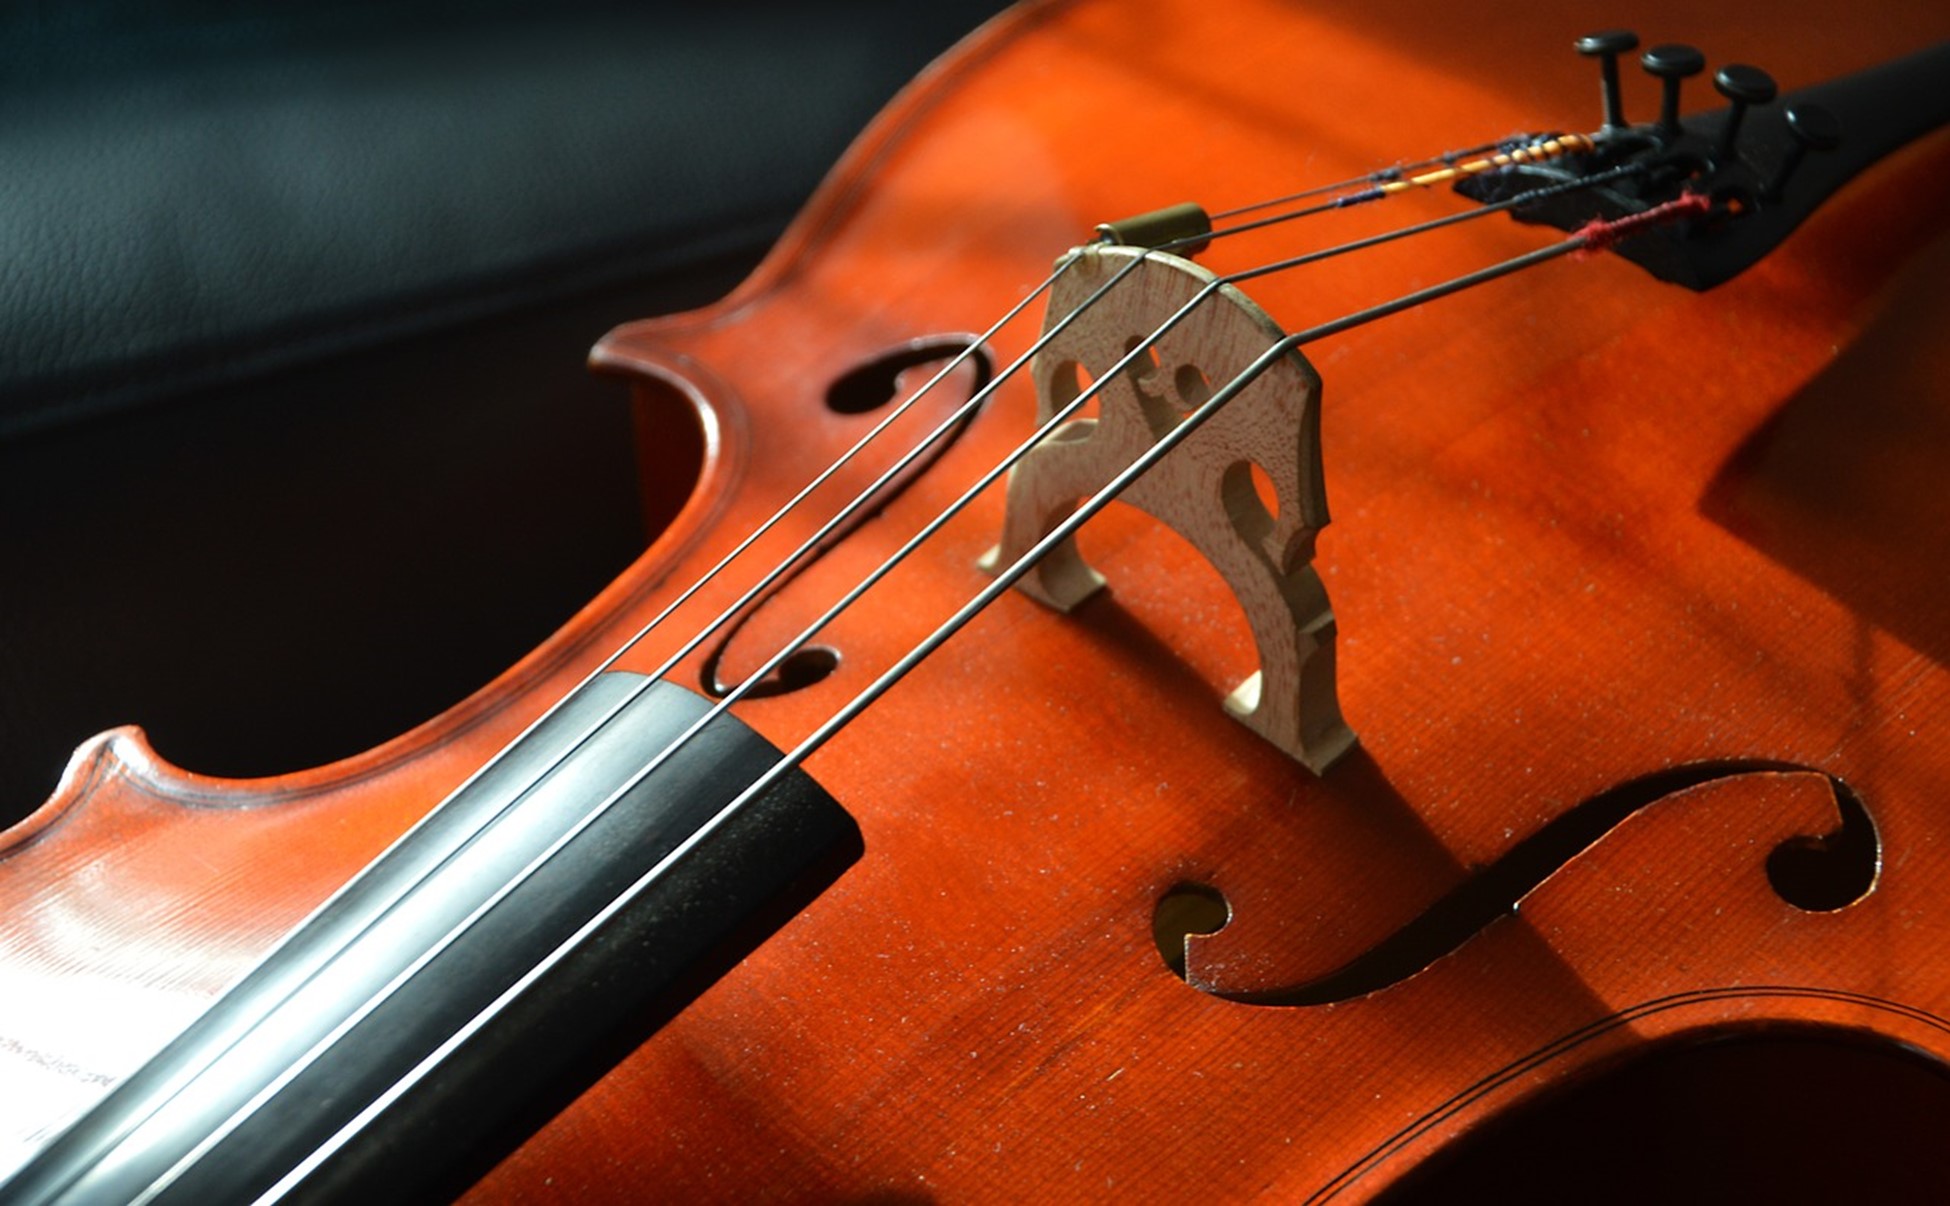 Cello Strings: How to Choose the Right Ones For Your Instrument